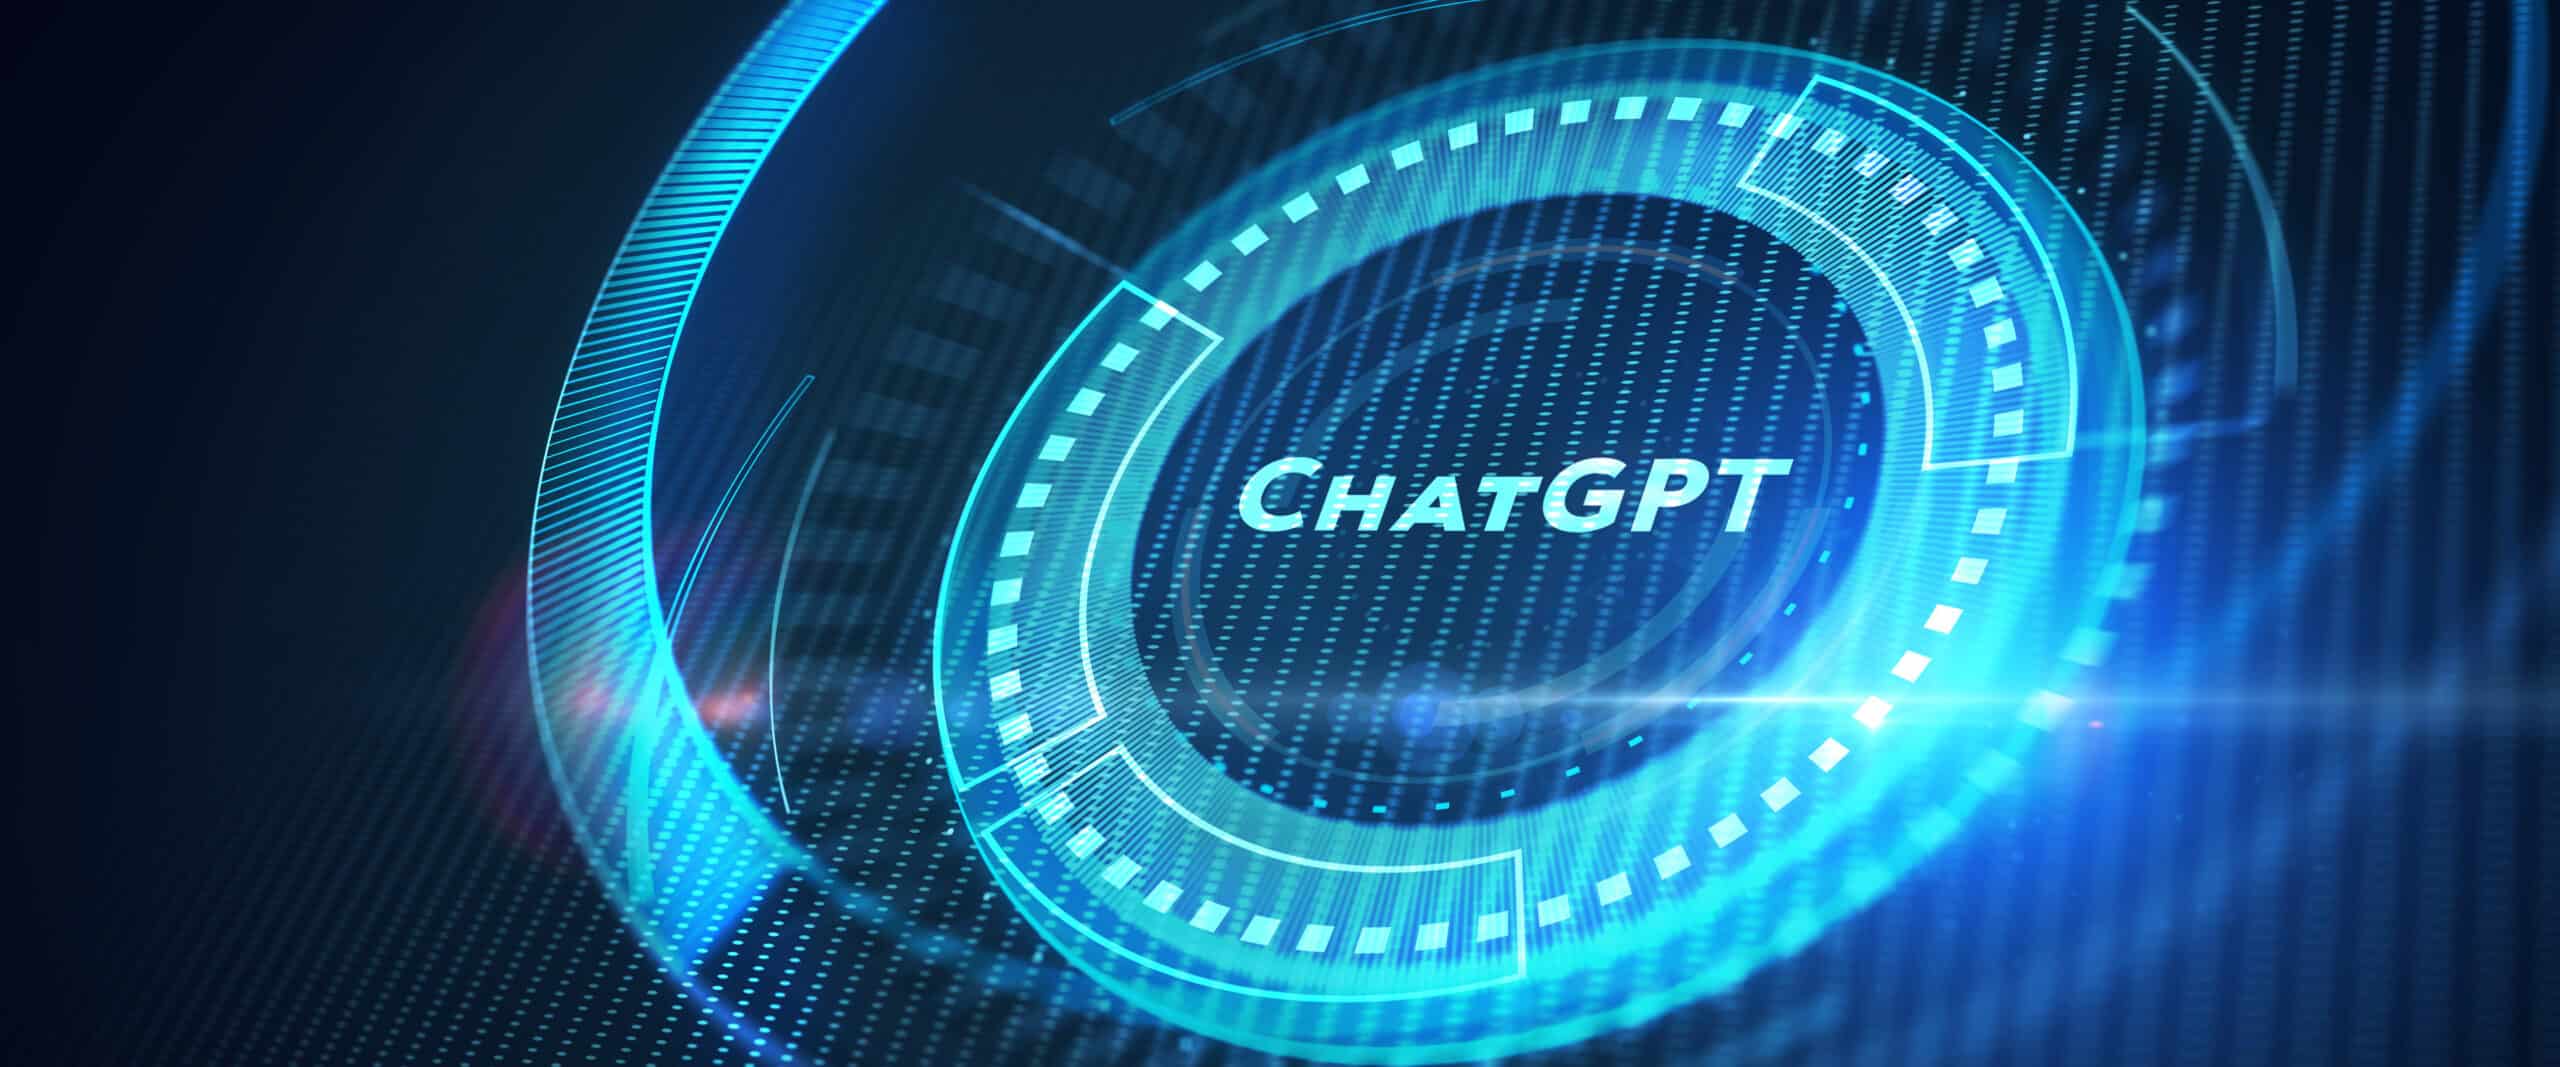 A virtual reality image with the word "ChatGPT" representing ChatGPT for Salesforce teams